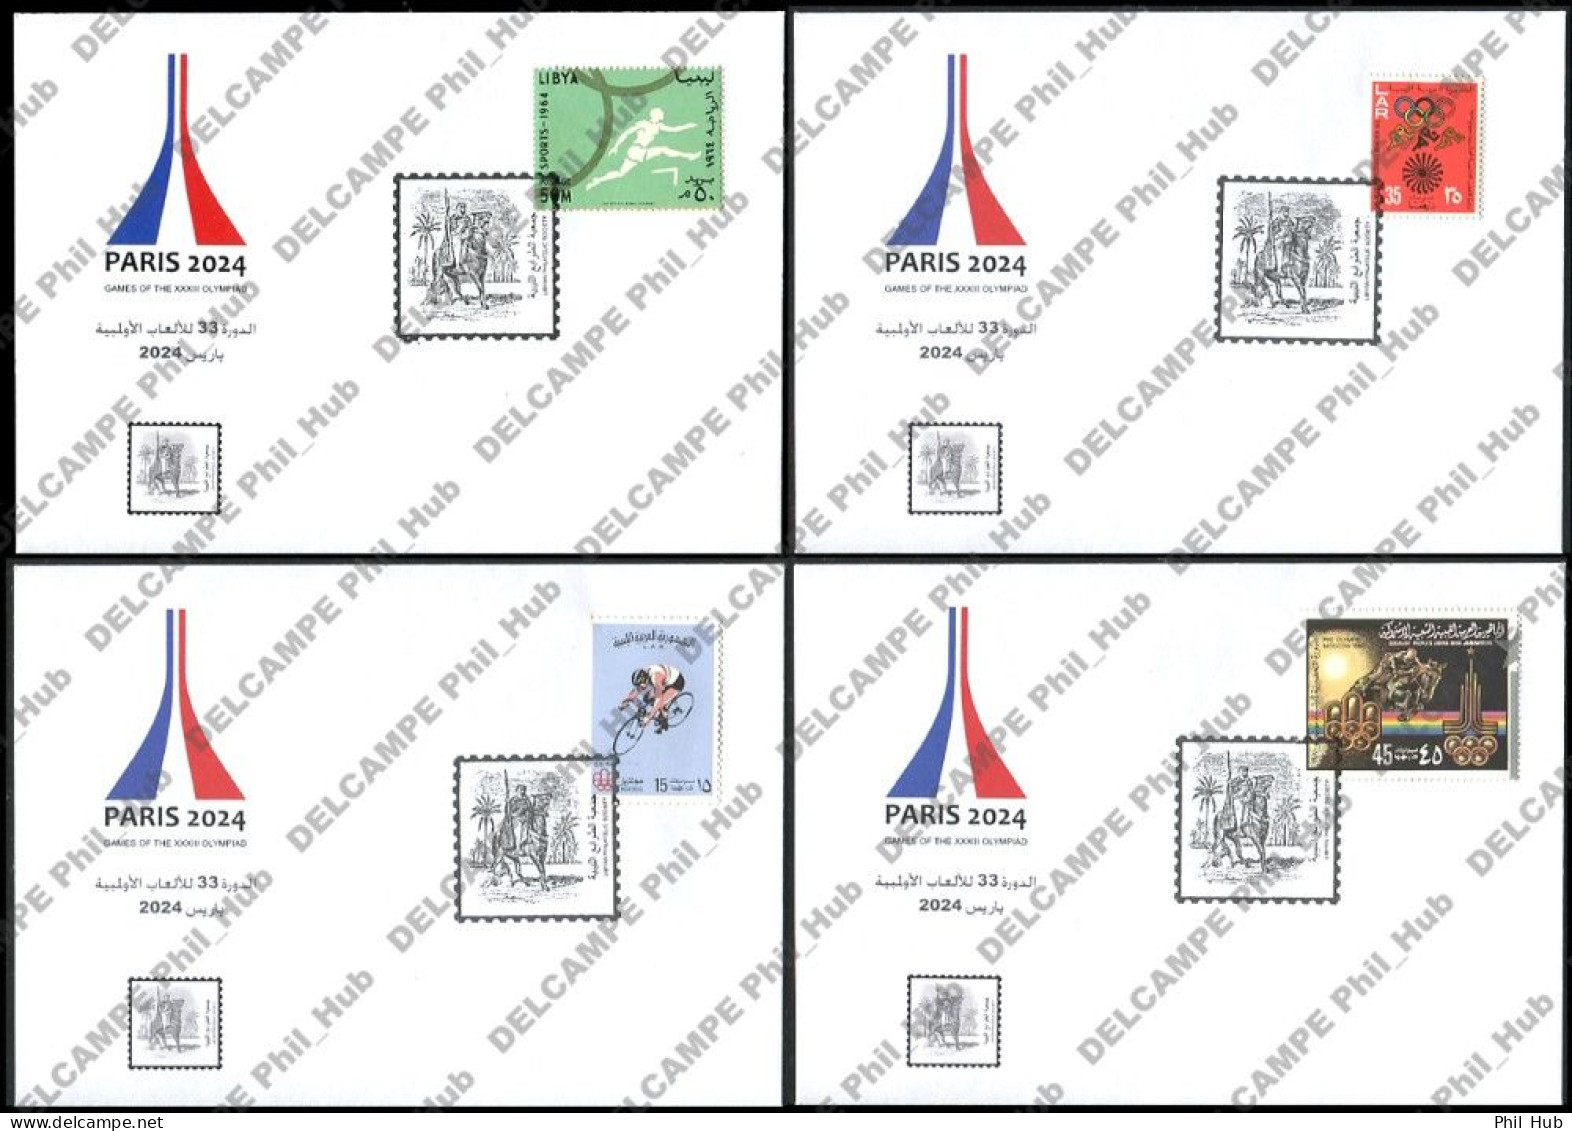 2024 PARIS FRANCE OLYMPICS (4 Libya Special Olympic Covers - #1) - Sommer 2024: Paris